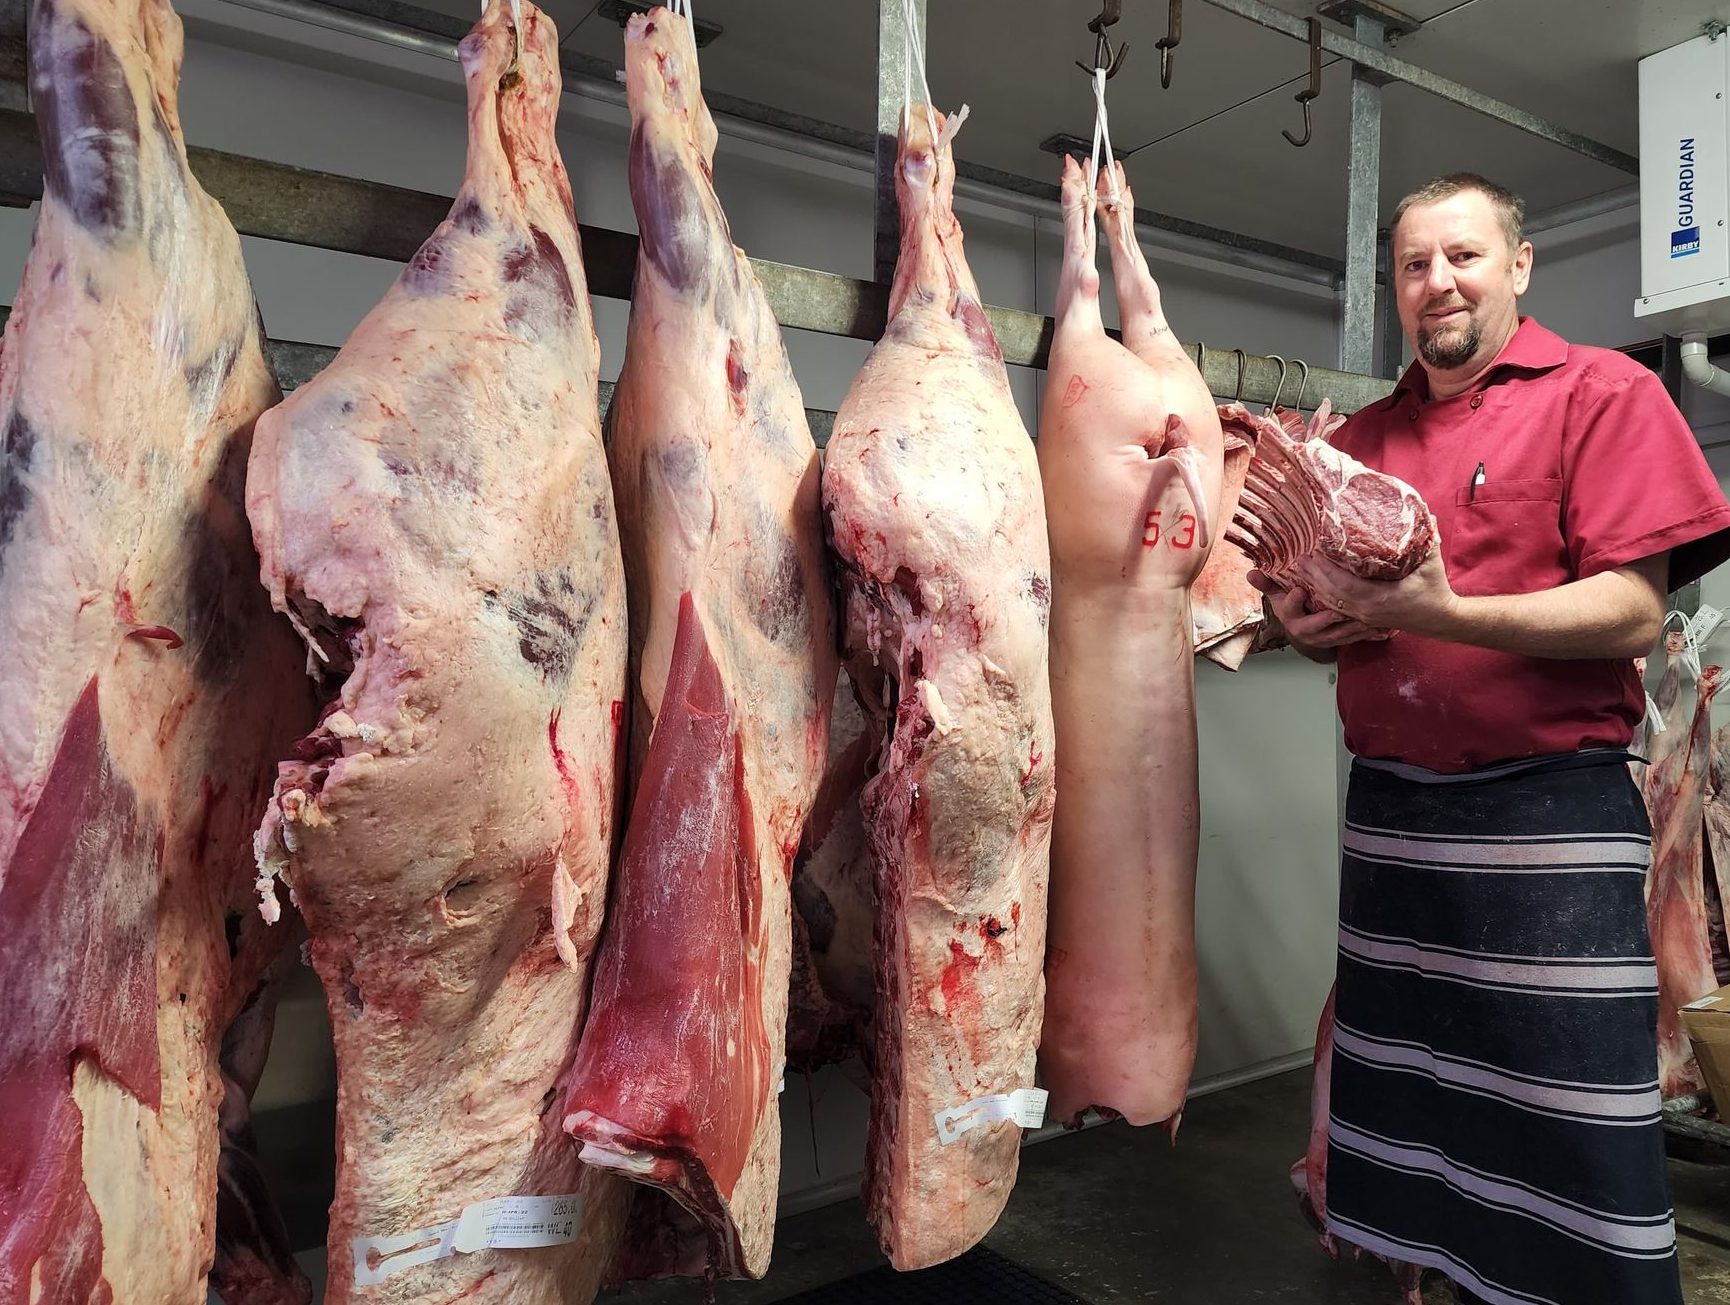 Bungendore butcher Sandy Tenkate snags his dream business in Cooma